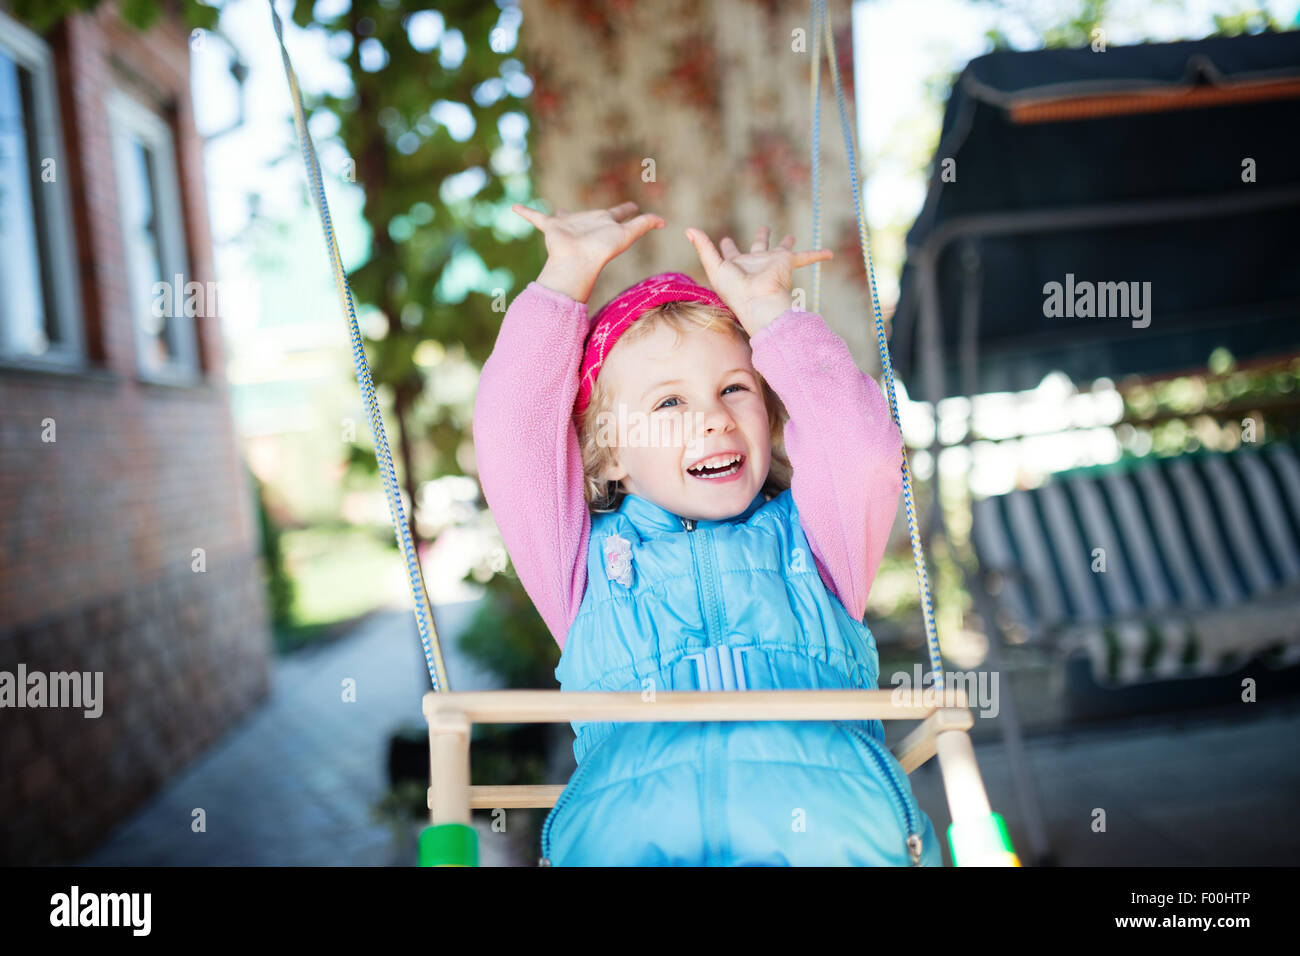 Laughing little girl on swing Stock Photo